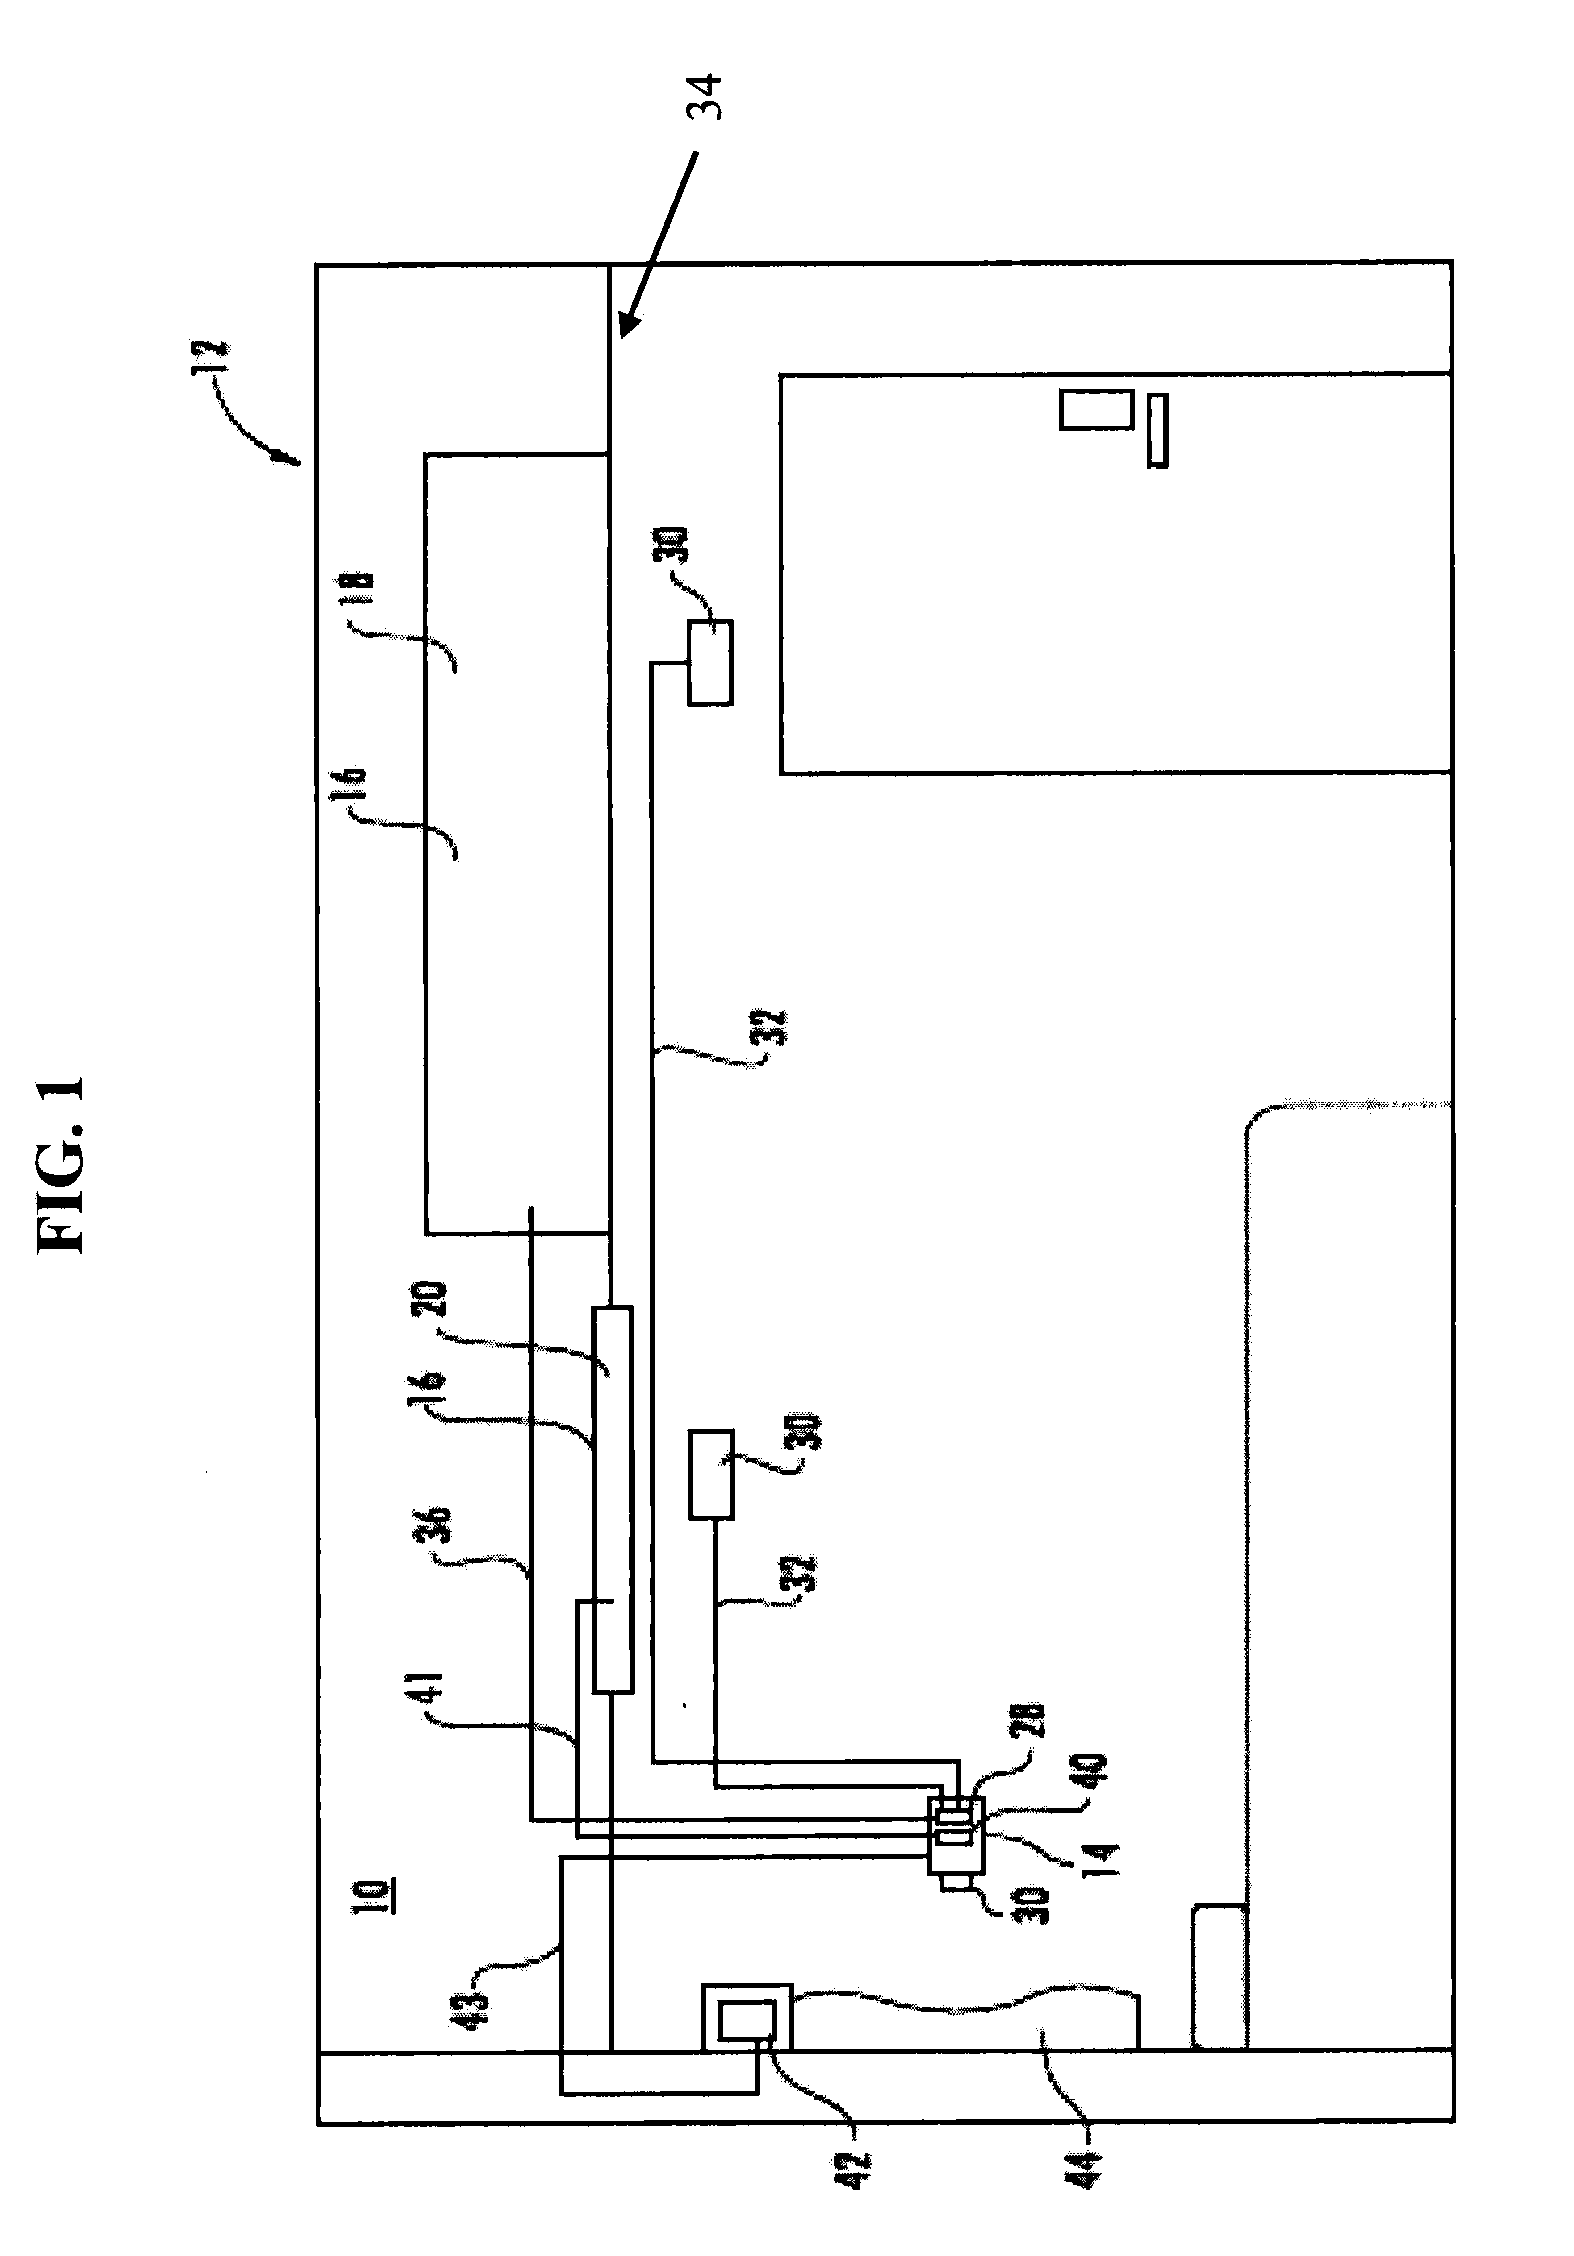 Occupant controlled energy management system and method for managing energy consumption in a multi-unit building